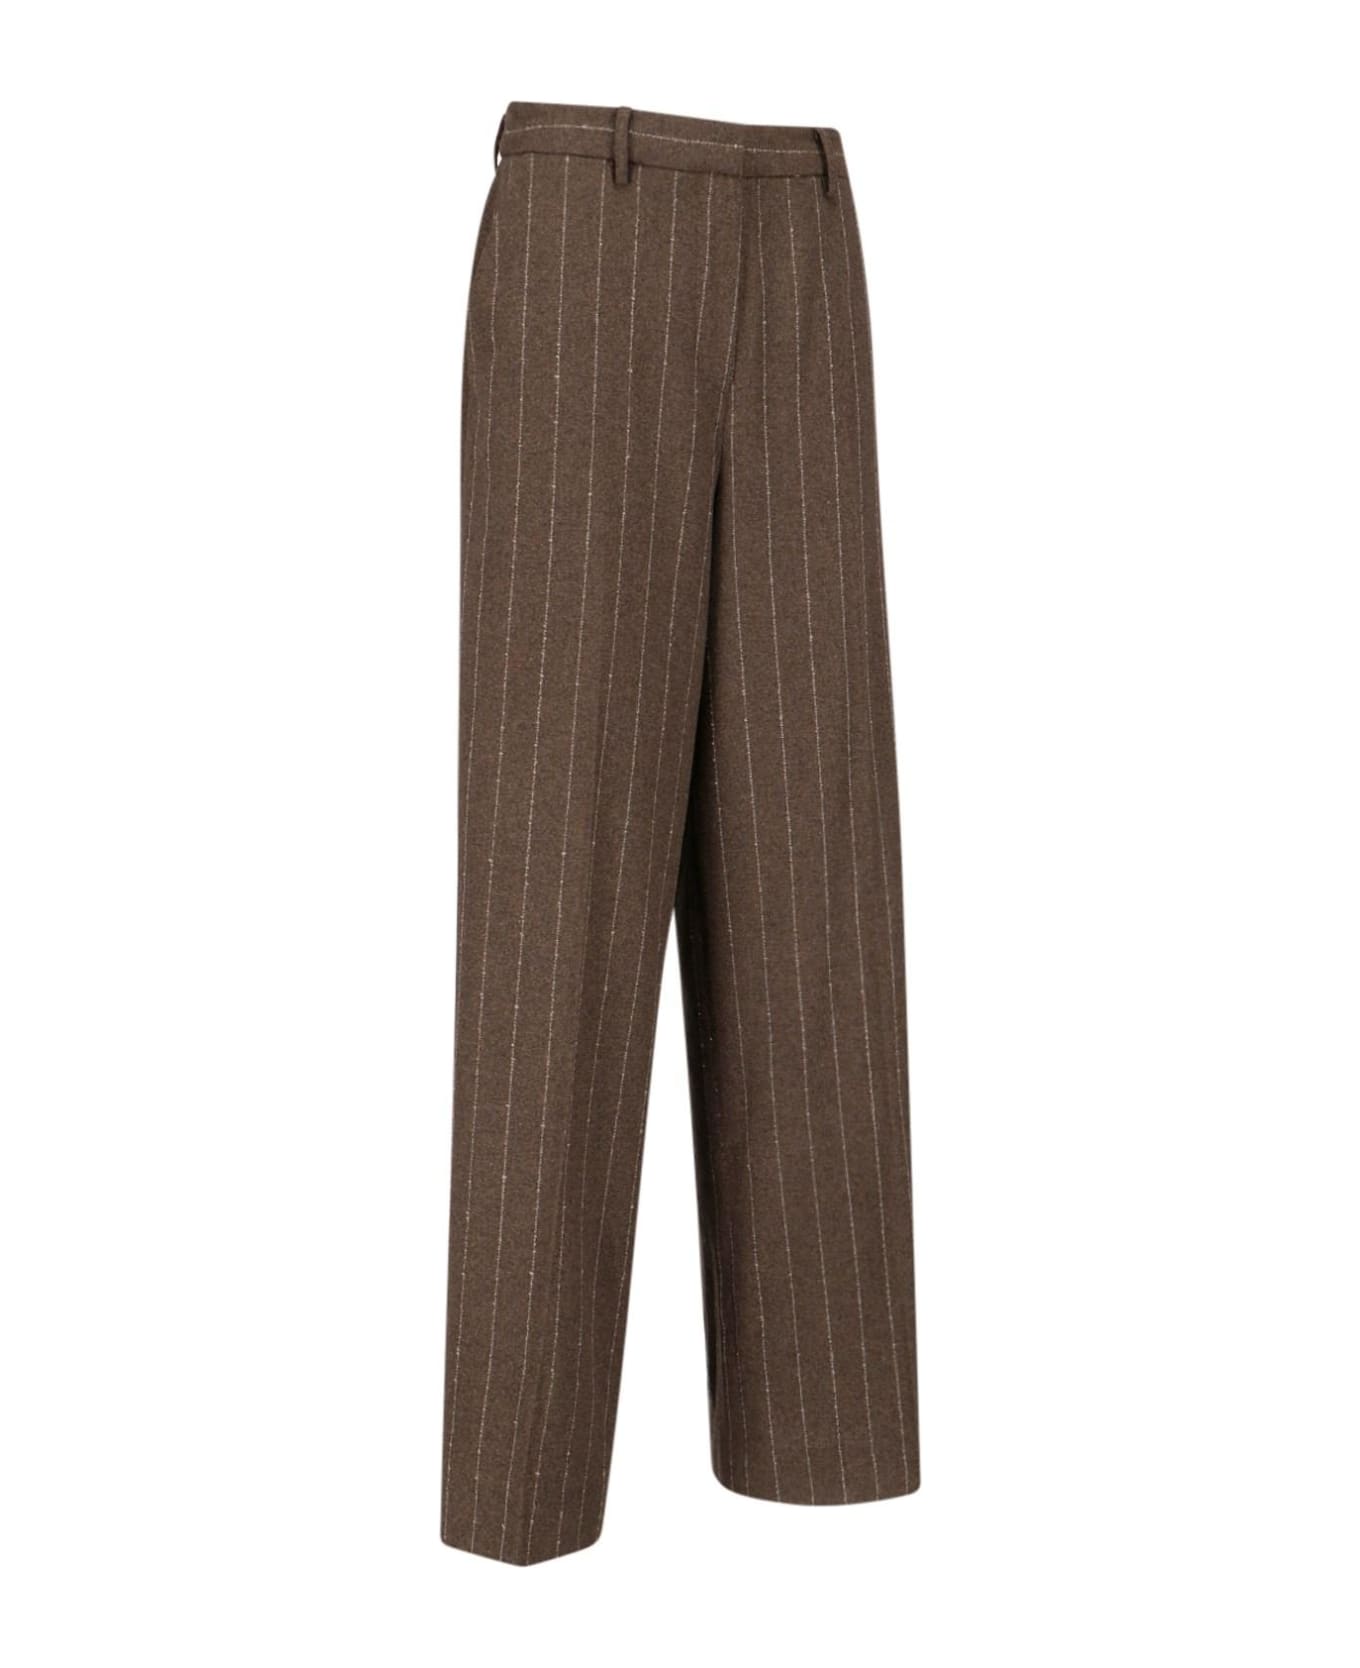 REMAIN Birger Christensen Stitched Tailored Pants - Brown ボトムス